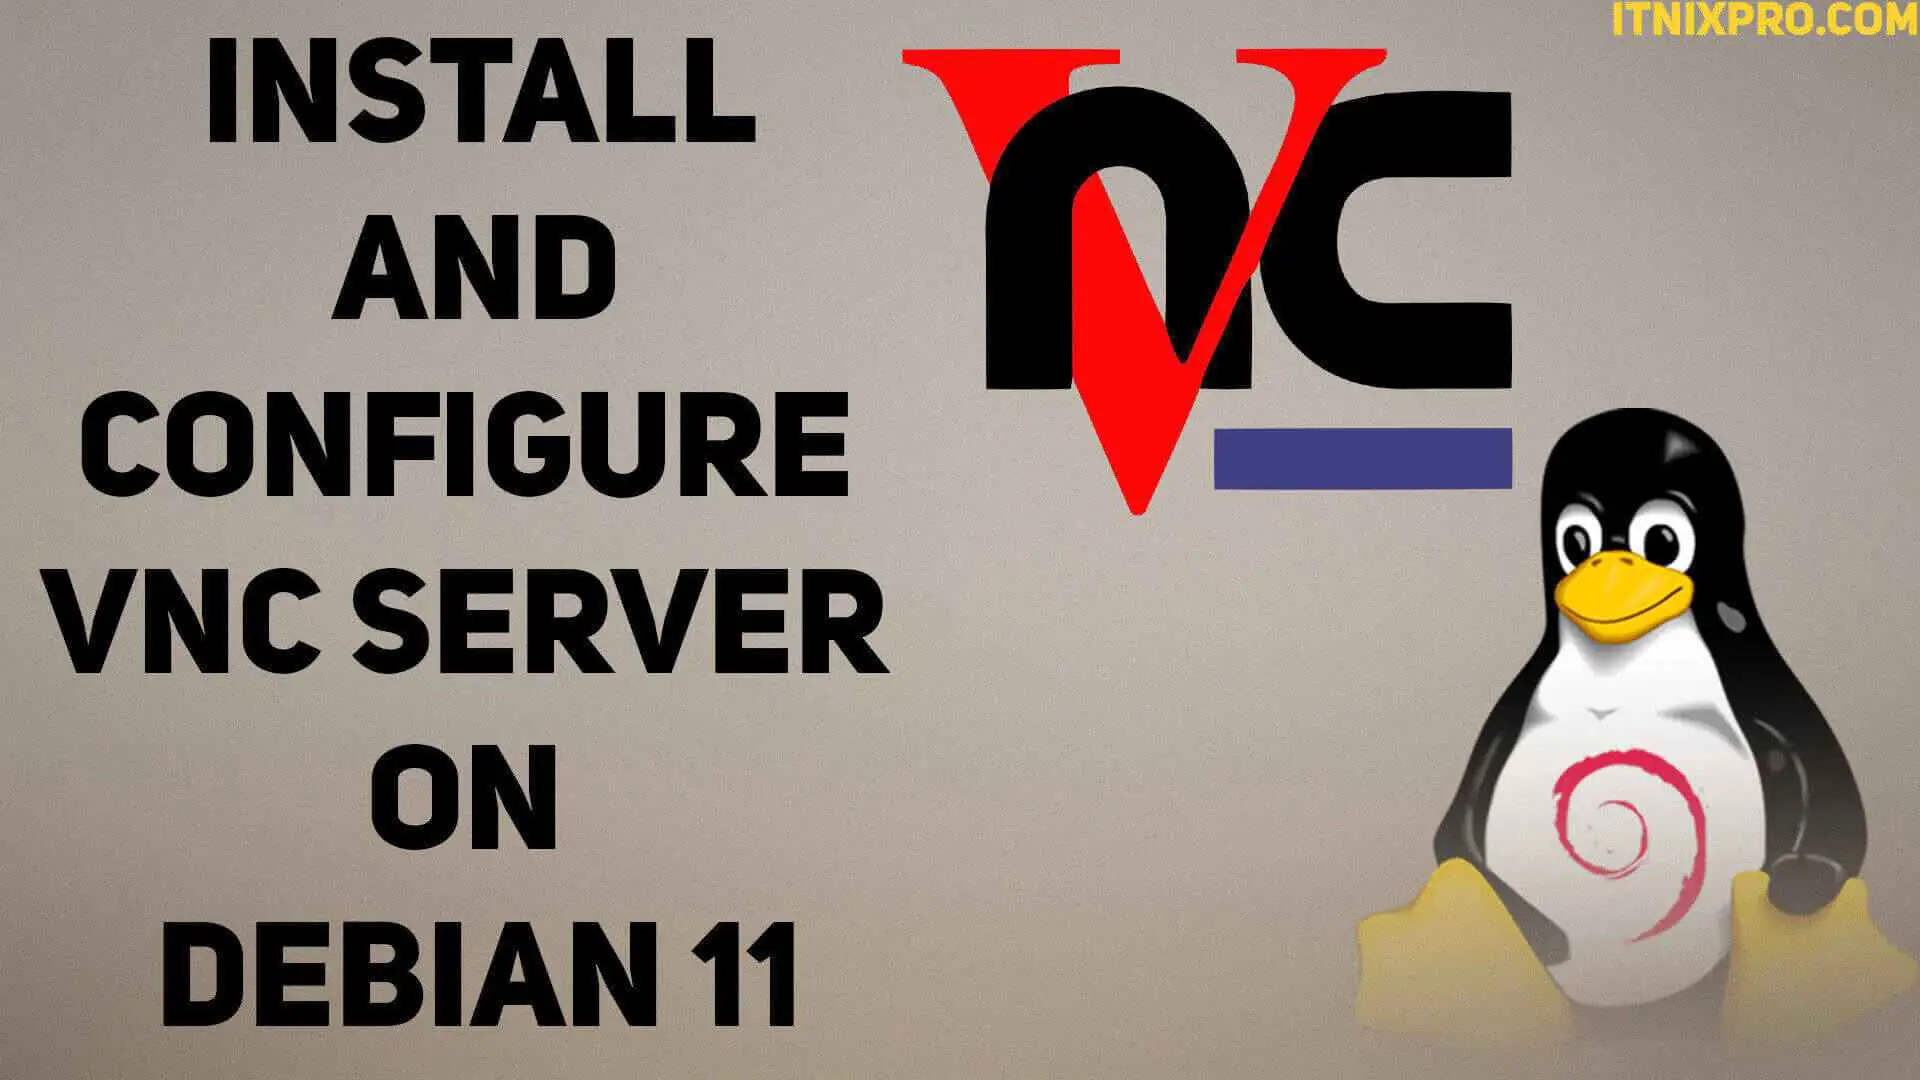 Install and Configure VNC server on Debian 11